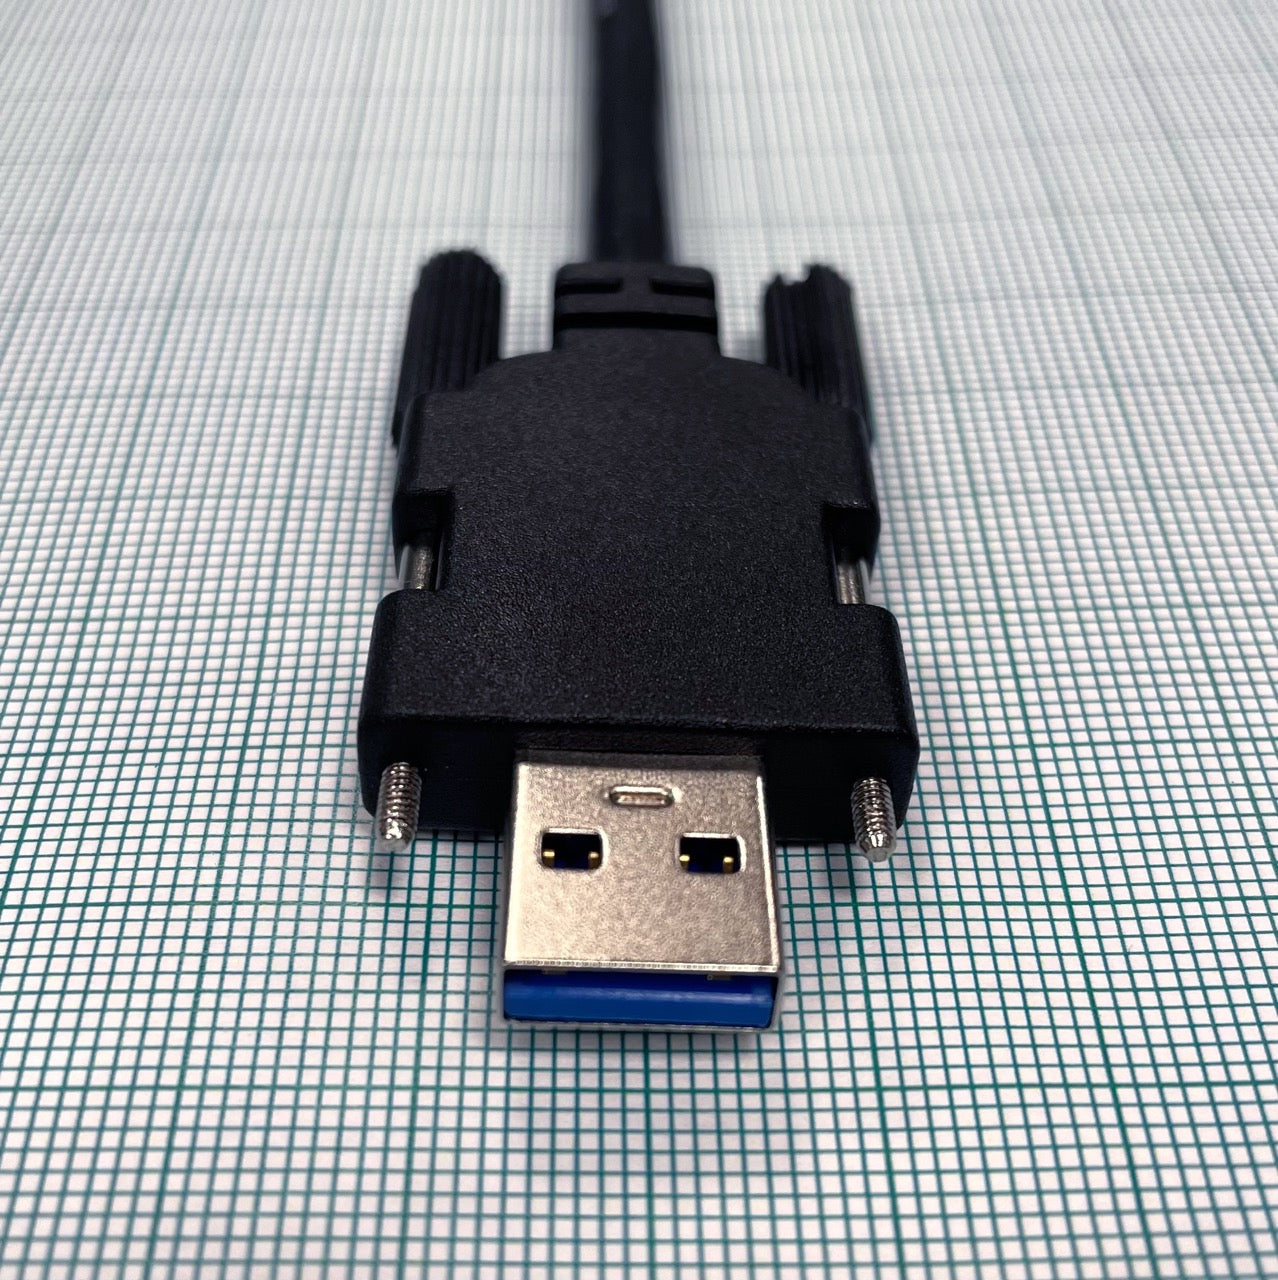 Perspective view of Type A USB 3.0 Vision screw lock connector